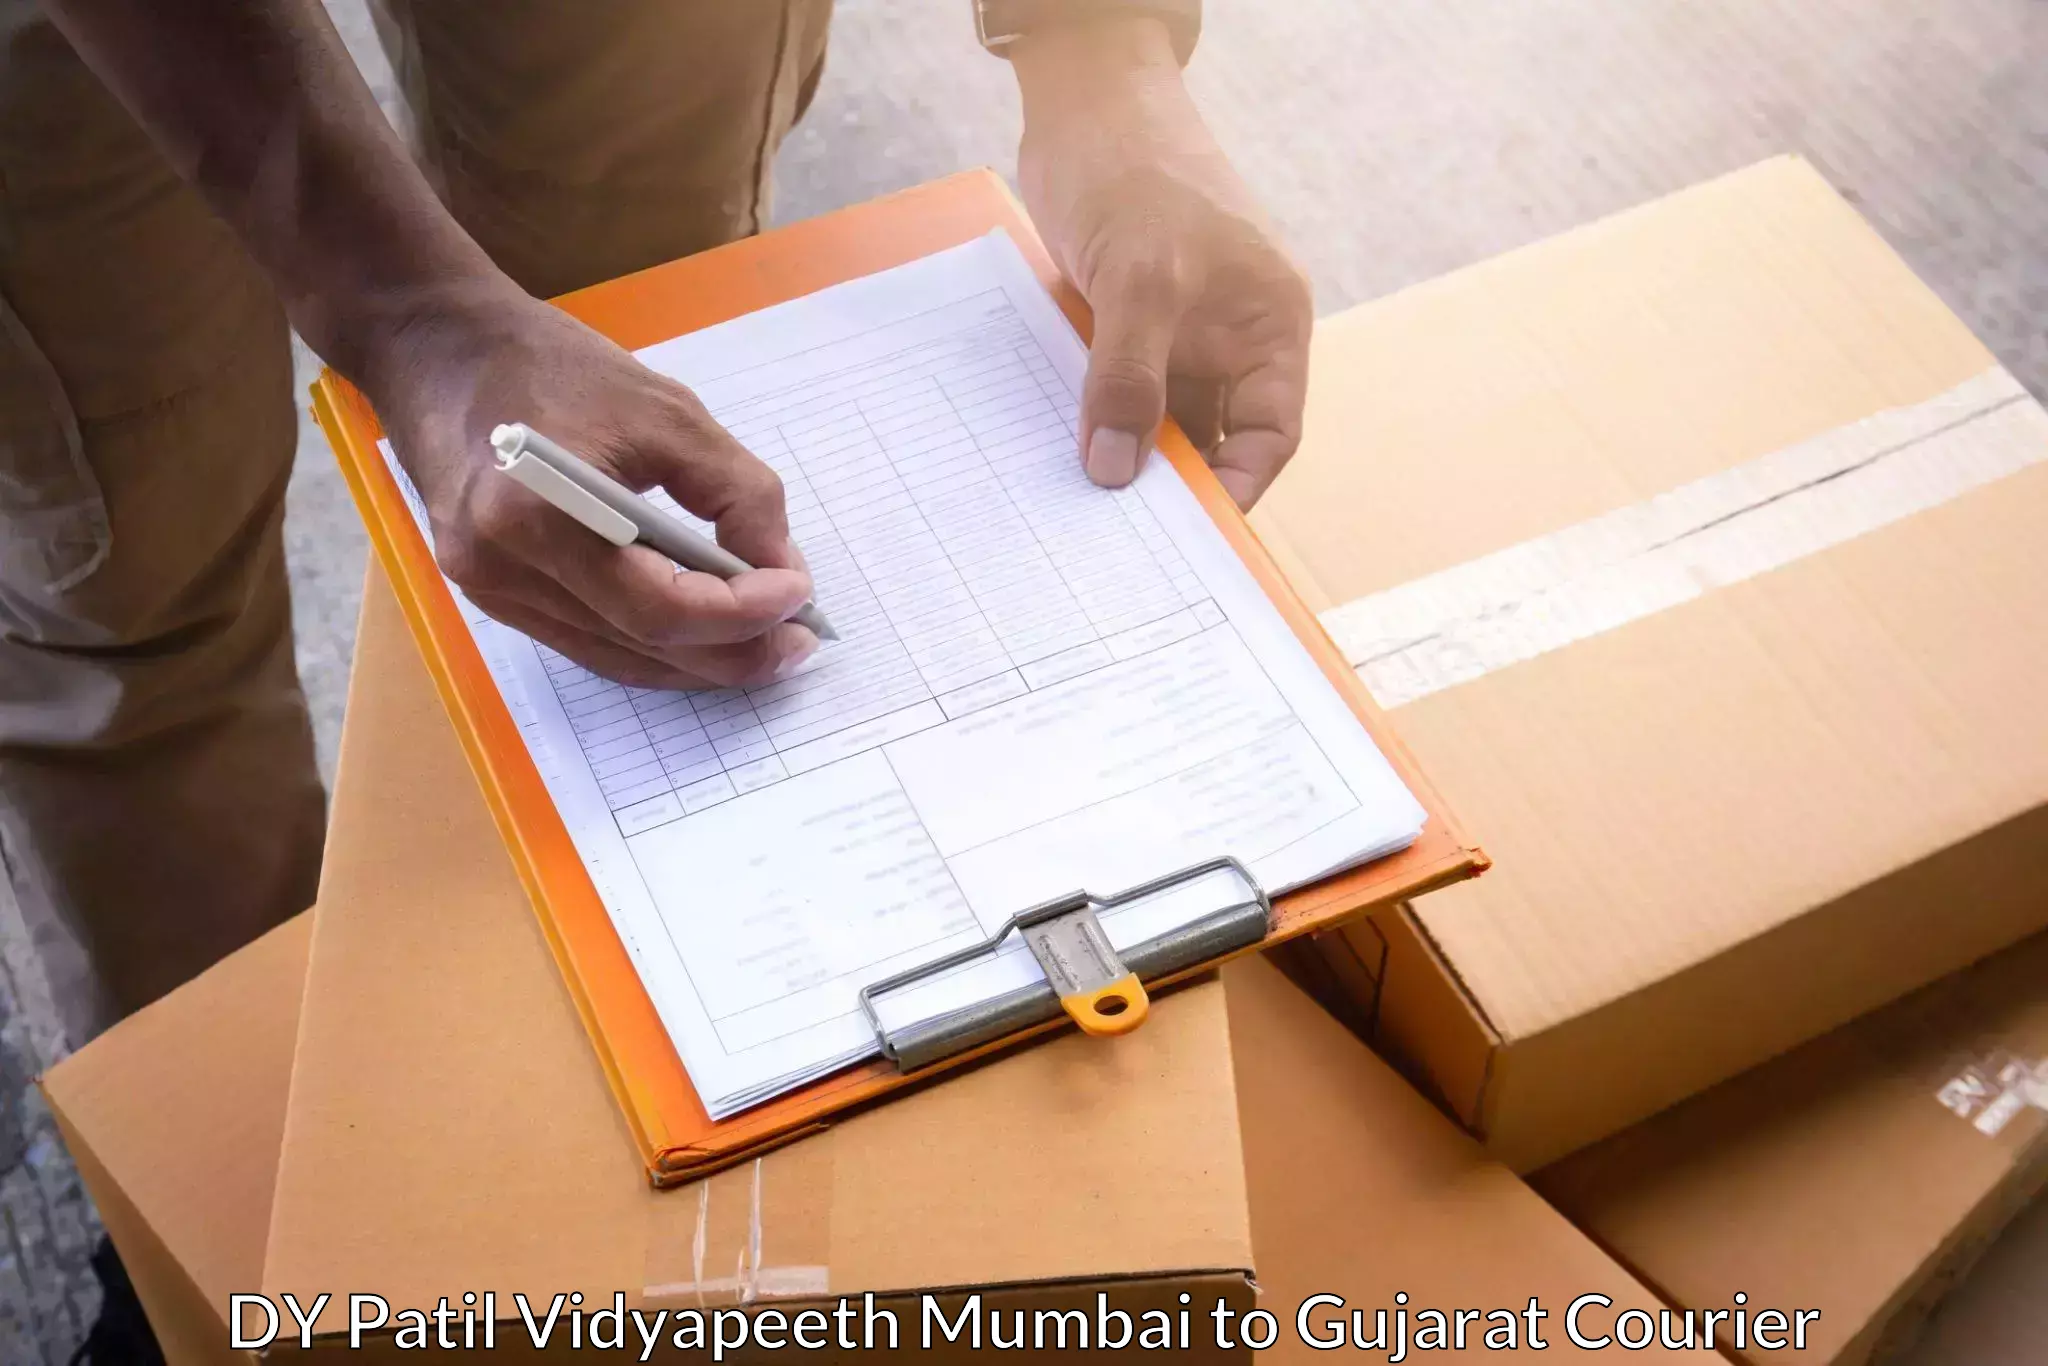 State-of-the-art courier technology DY Patil Vidyapeeth Mumbai to Mehsana